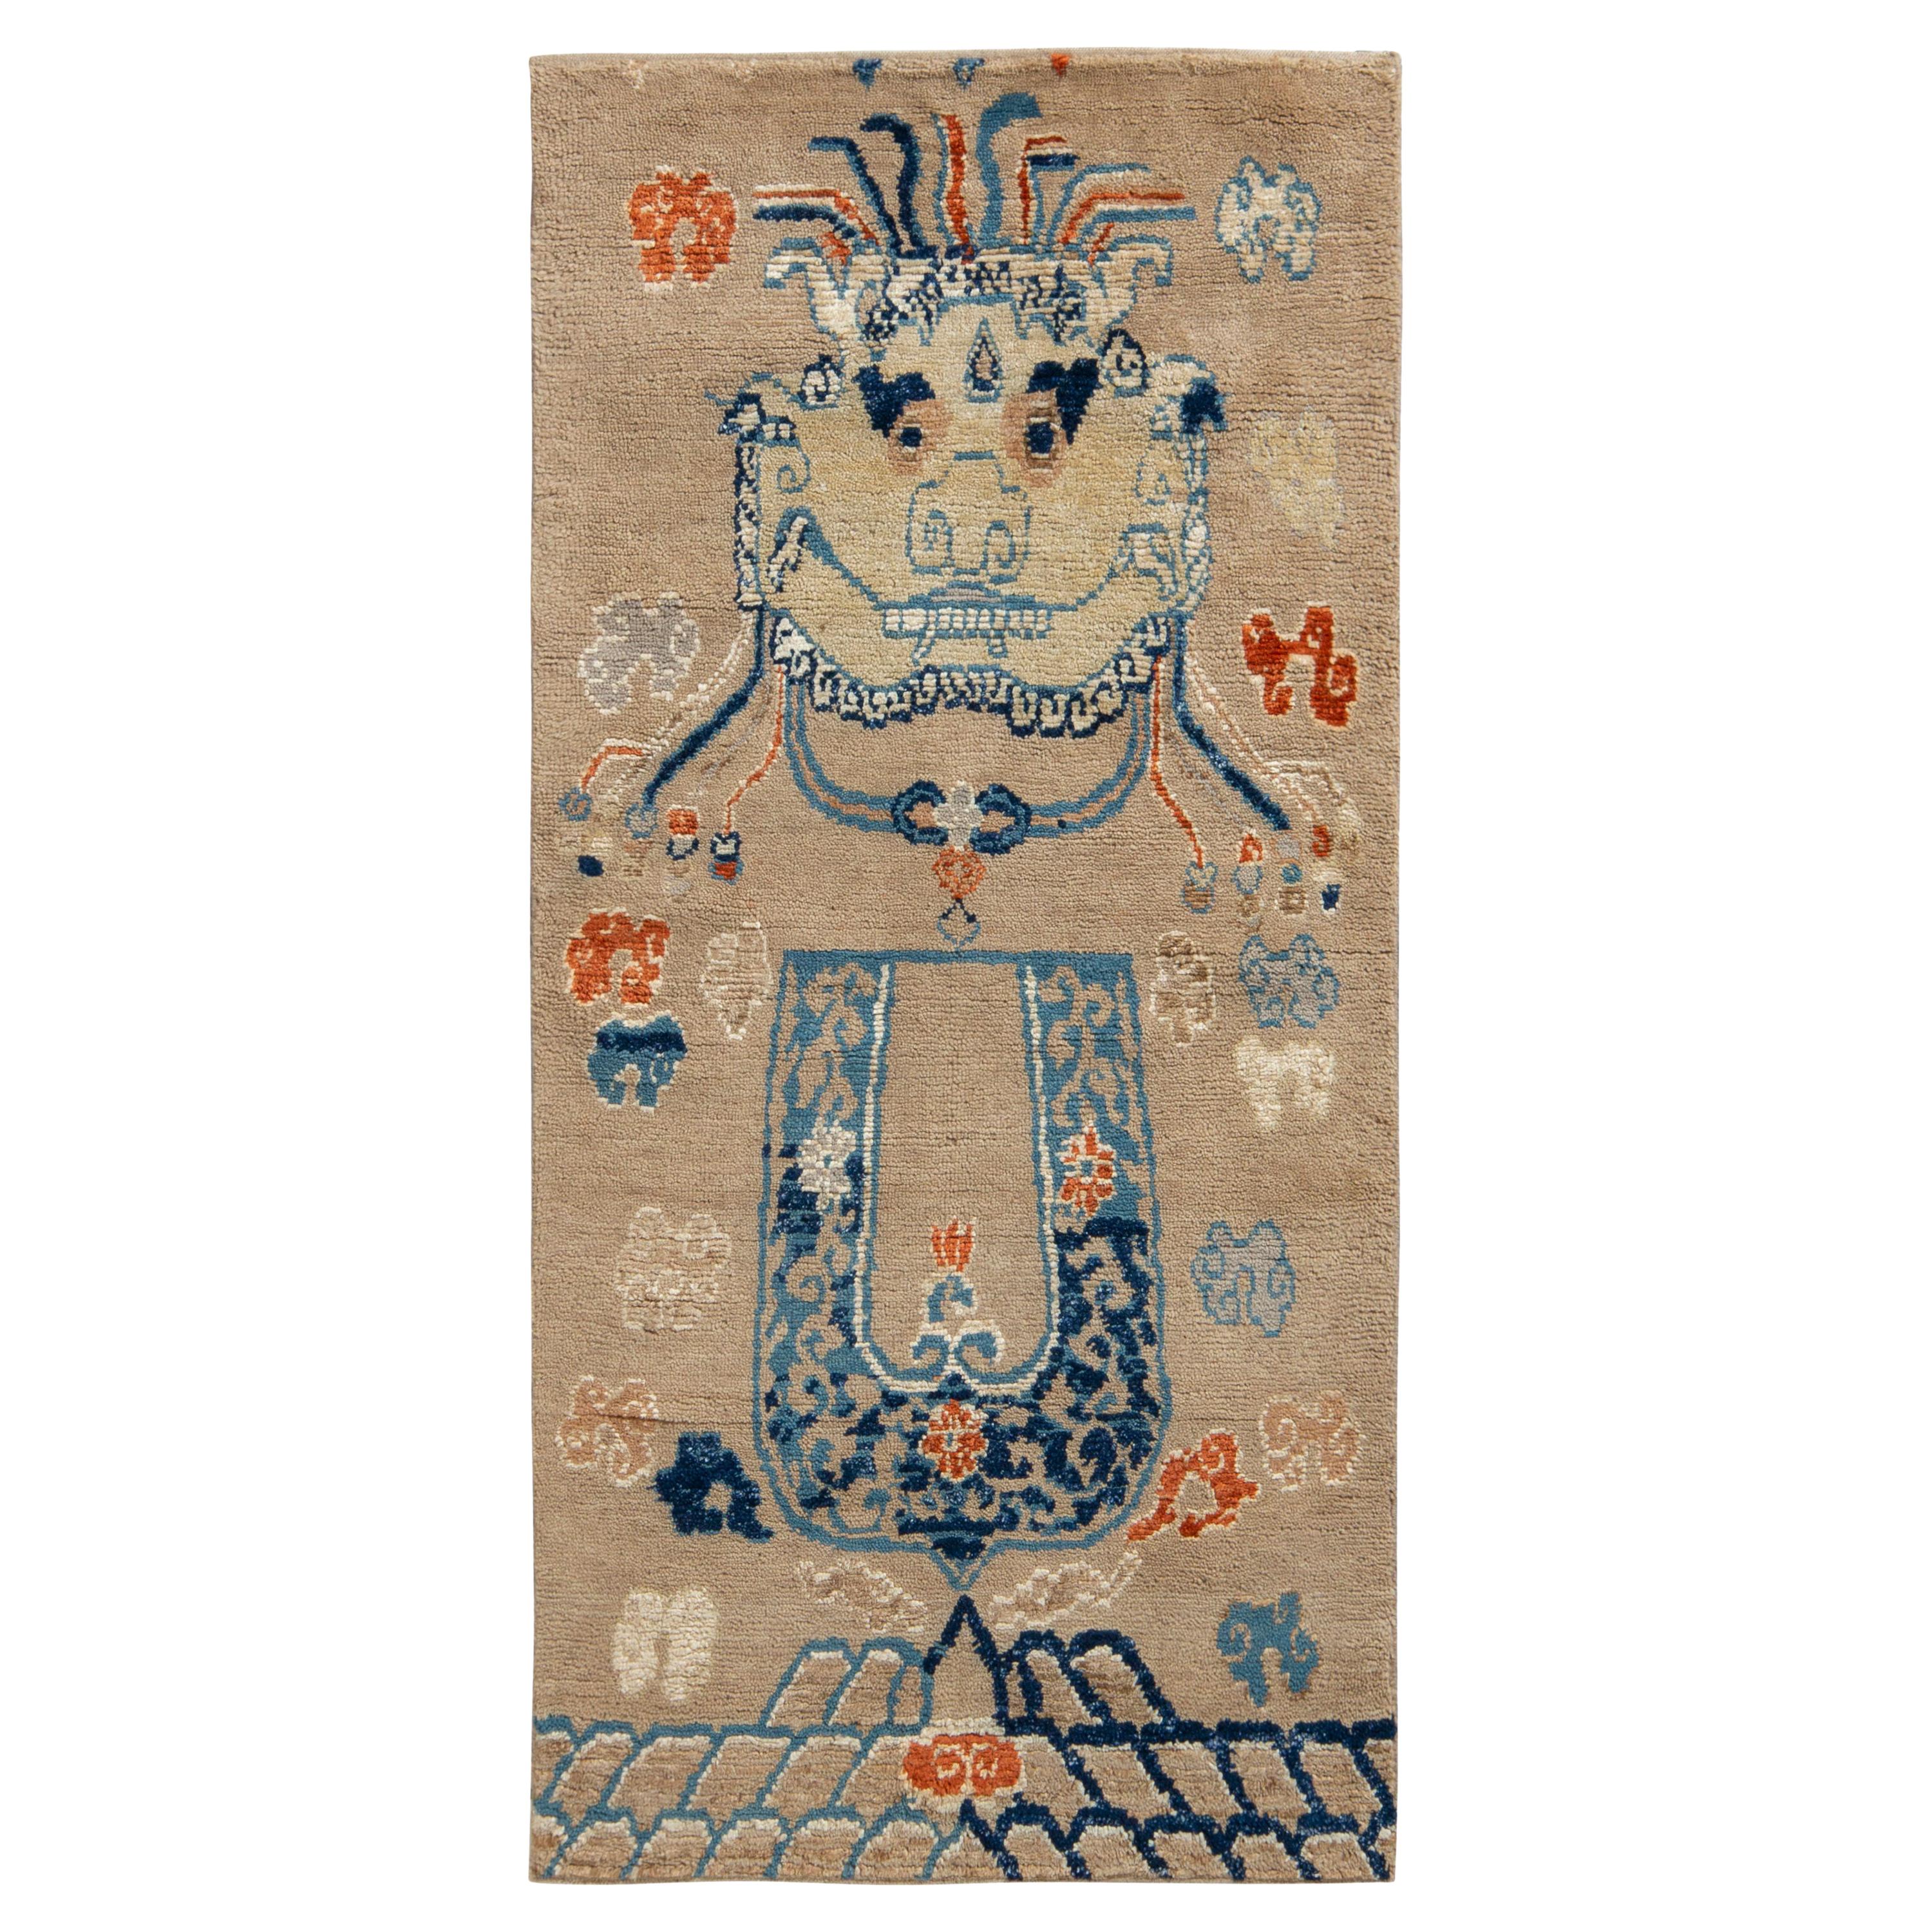 Rug & Kilim’s Chinese Style Tiger Runner in Beige and Blue Pictorial Patterns